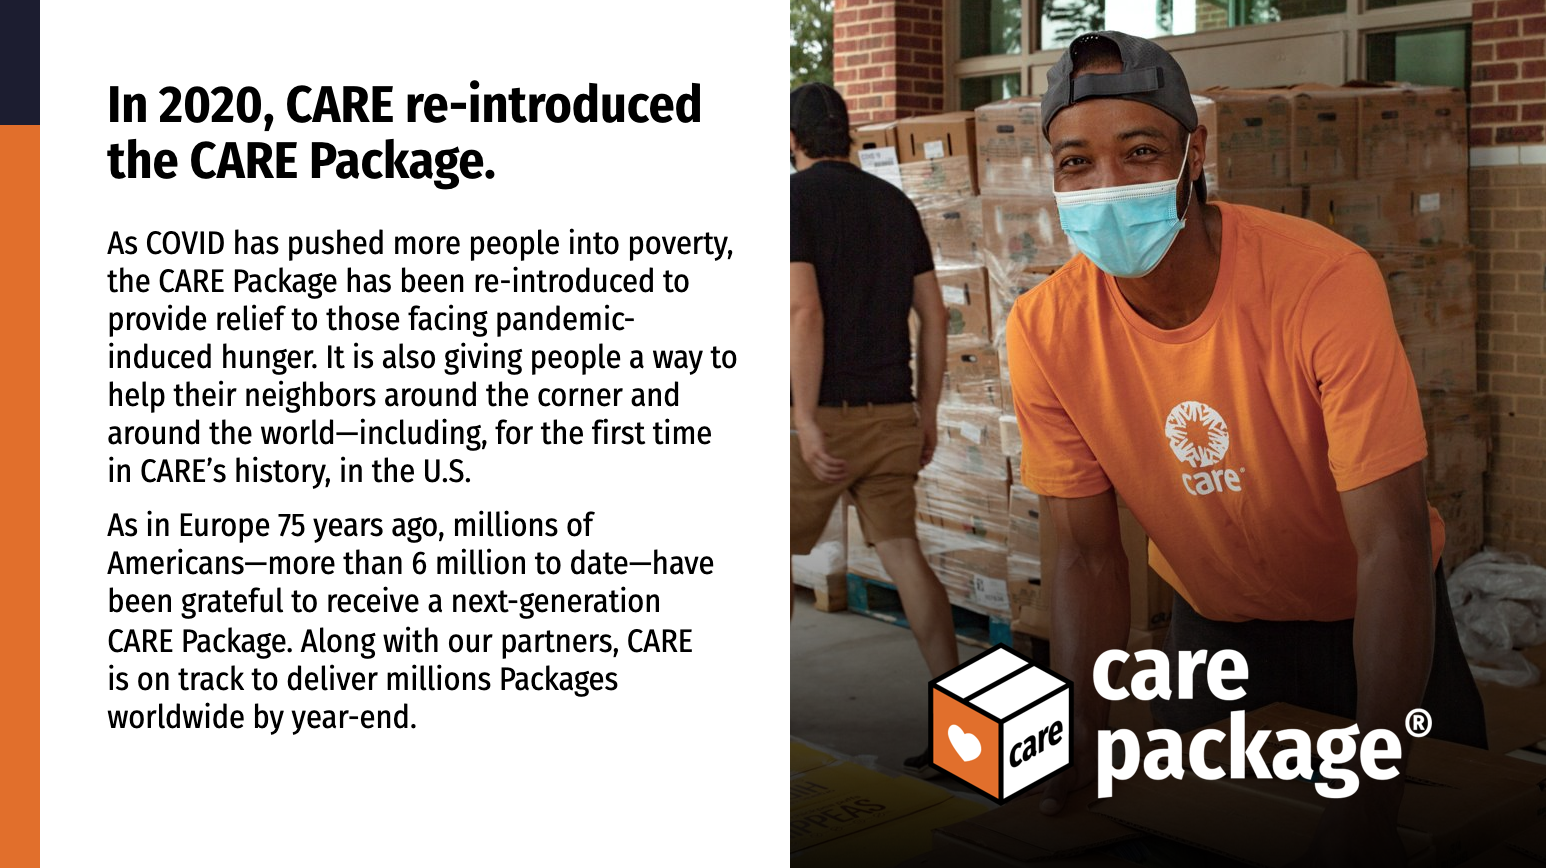 A slide from the CARE Package presentation detailing the 2020 reintroduction of the CARE Package.